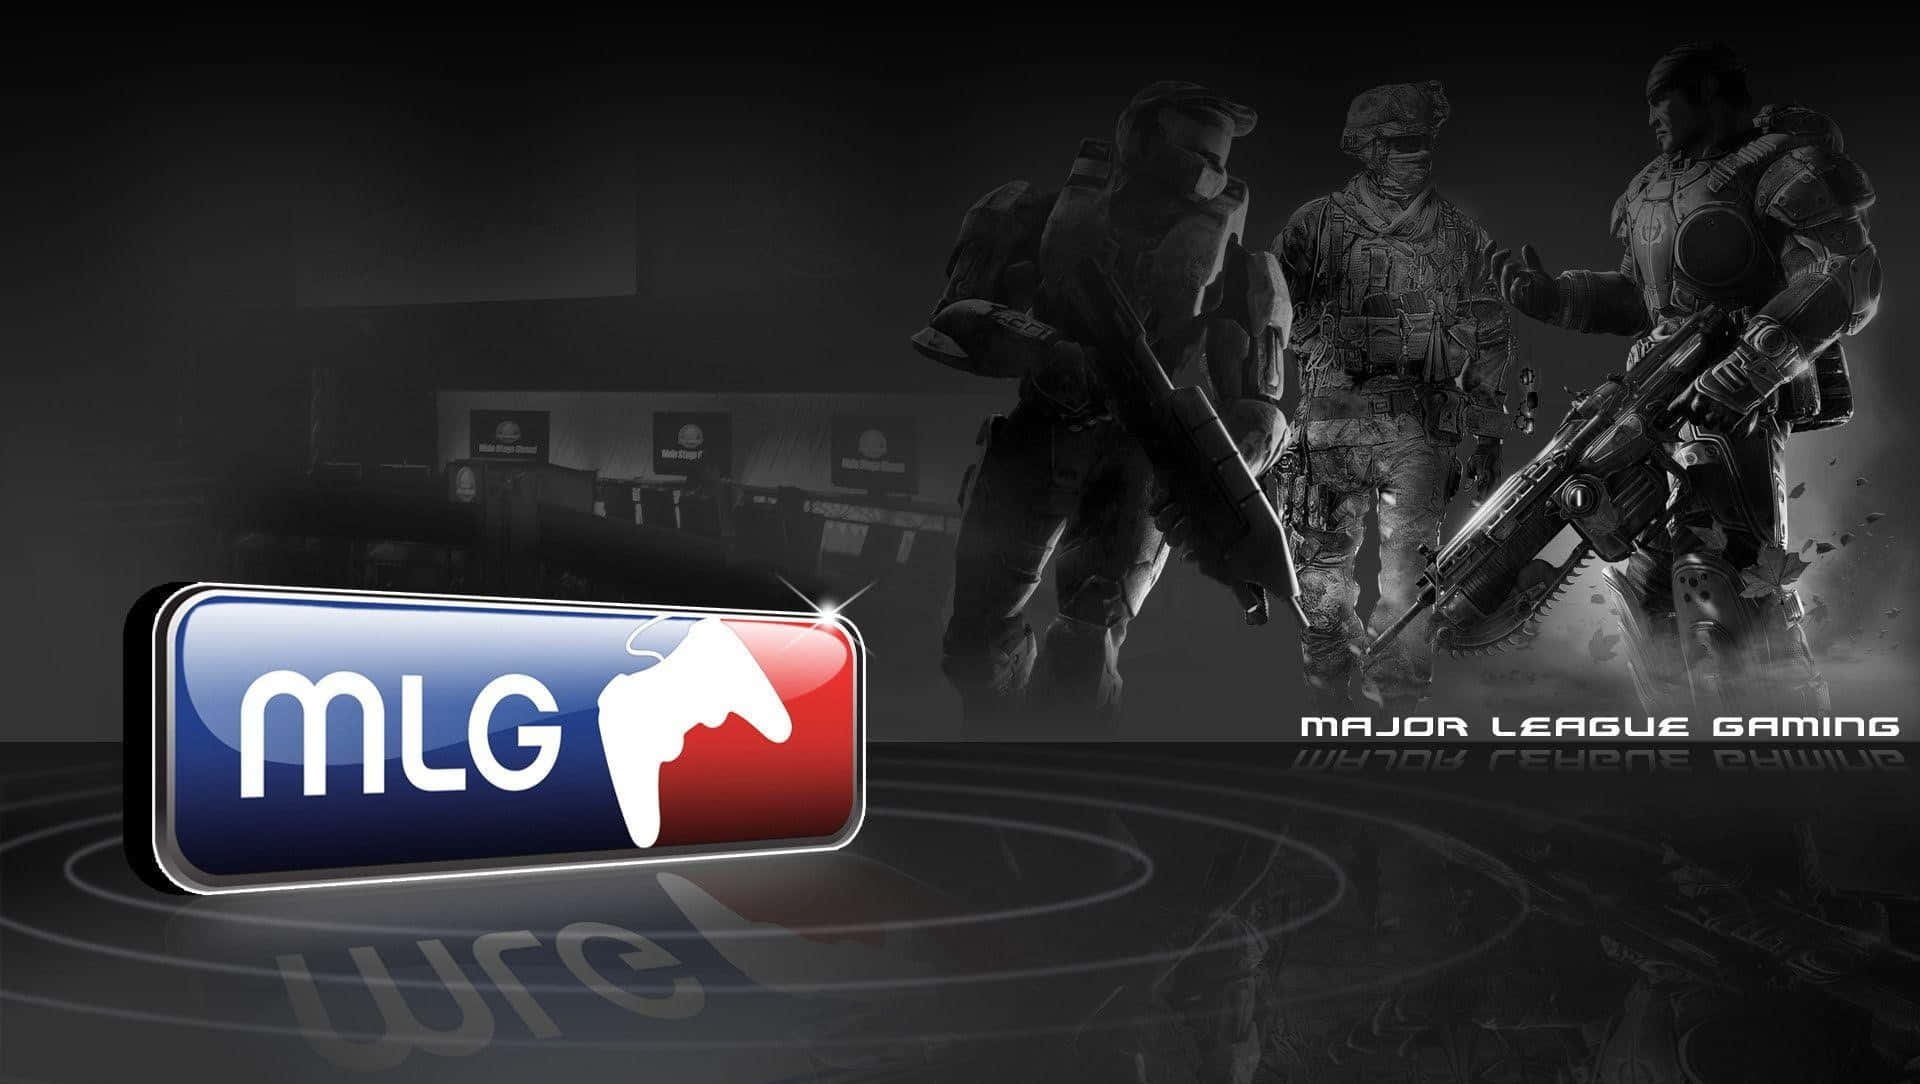 Get ready for the next level of gaming with MLG